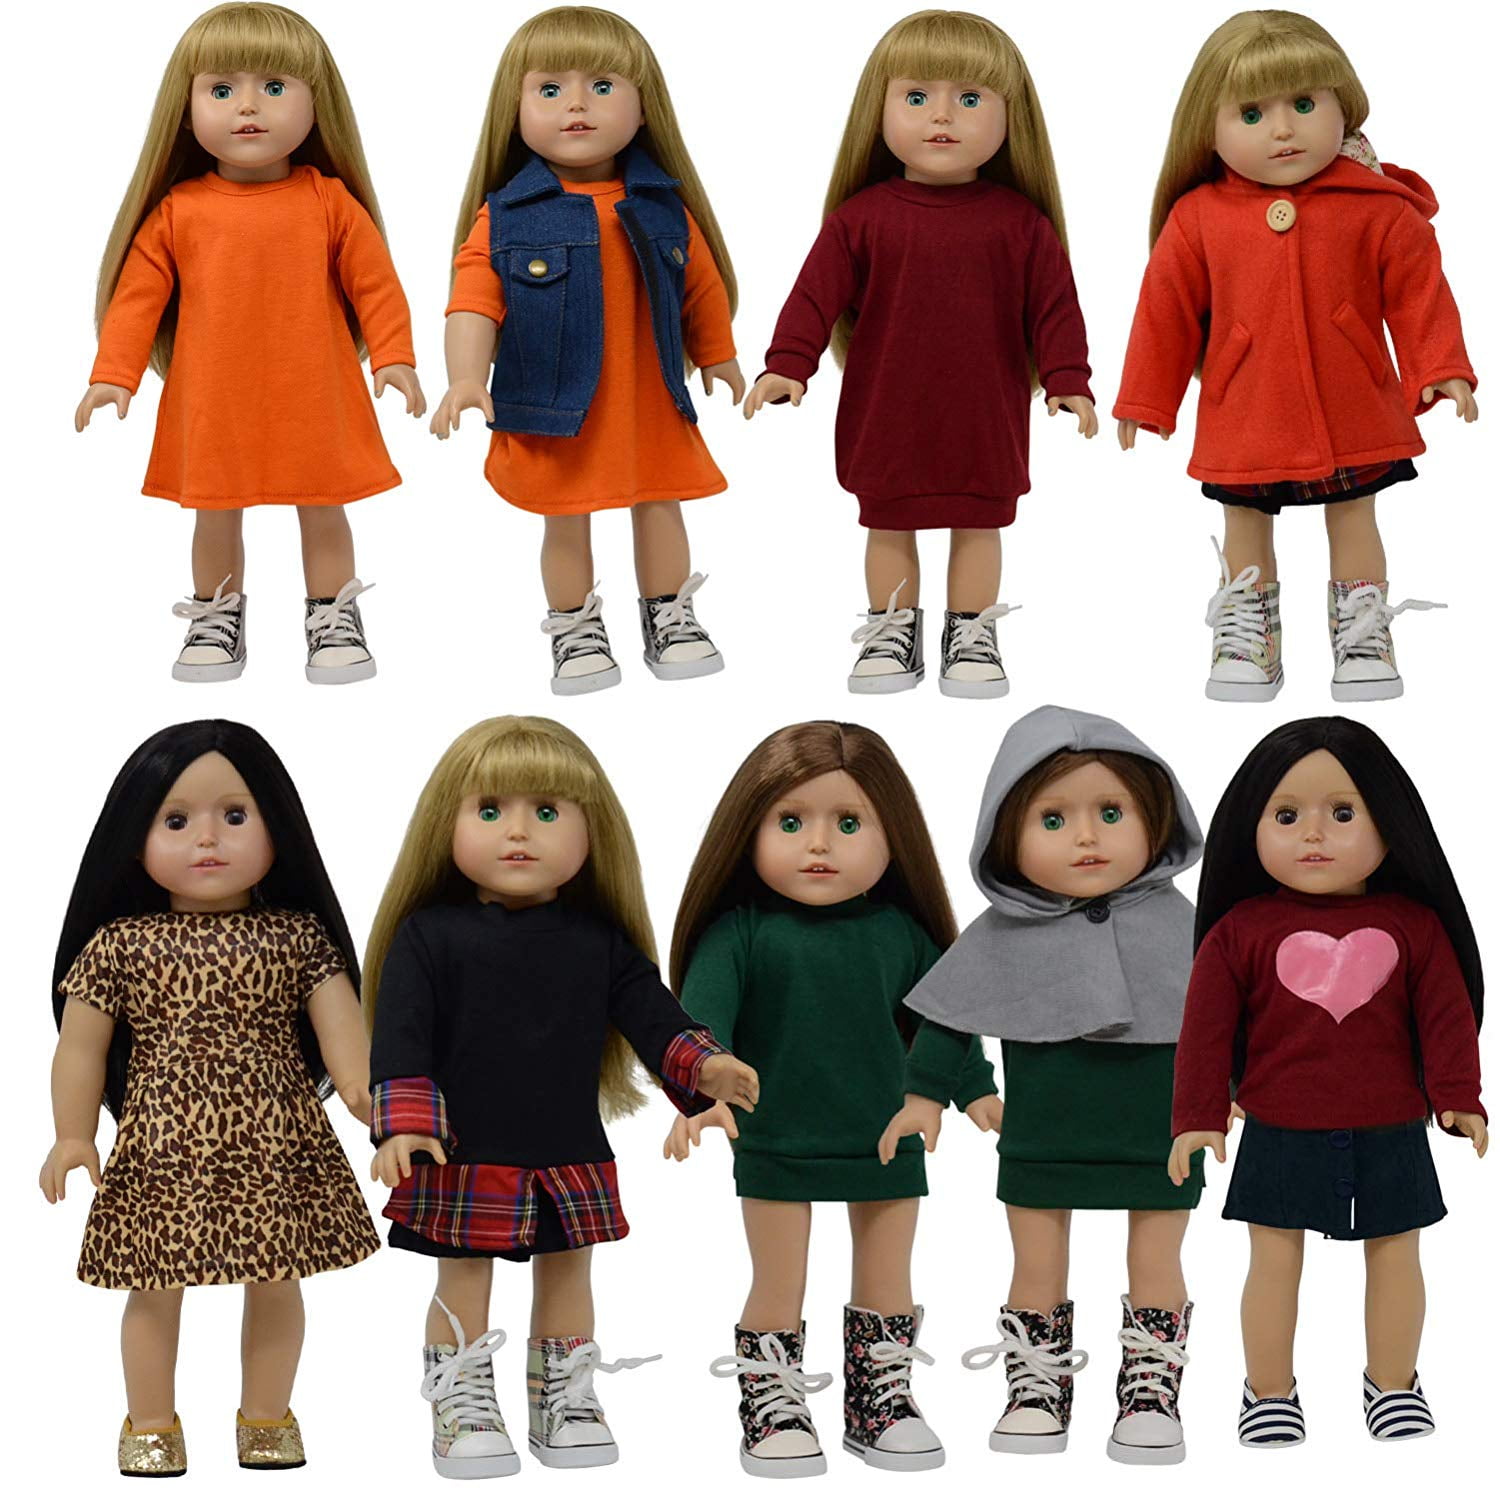 18 Inch Doll Clothes Set of 10 pc for American Girl Doll Clothing - fits 18  inch Doll Dresses - Walmart.com - Walmart.com